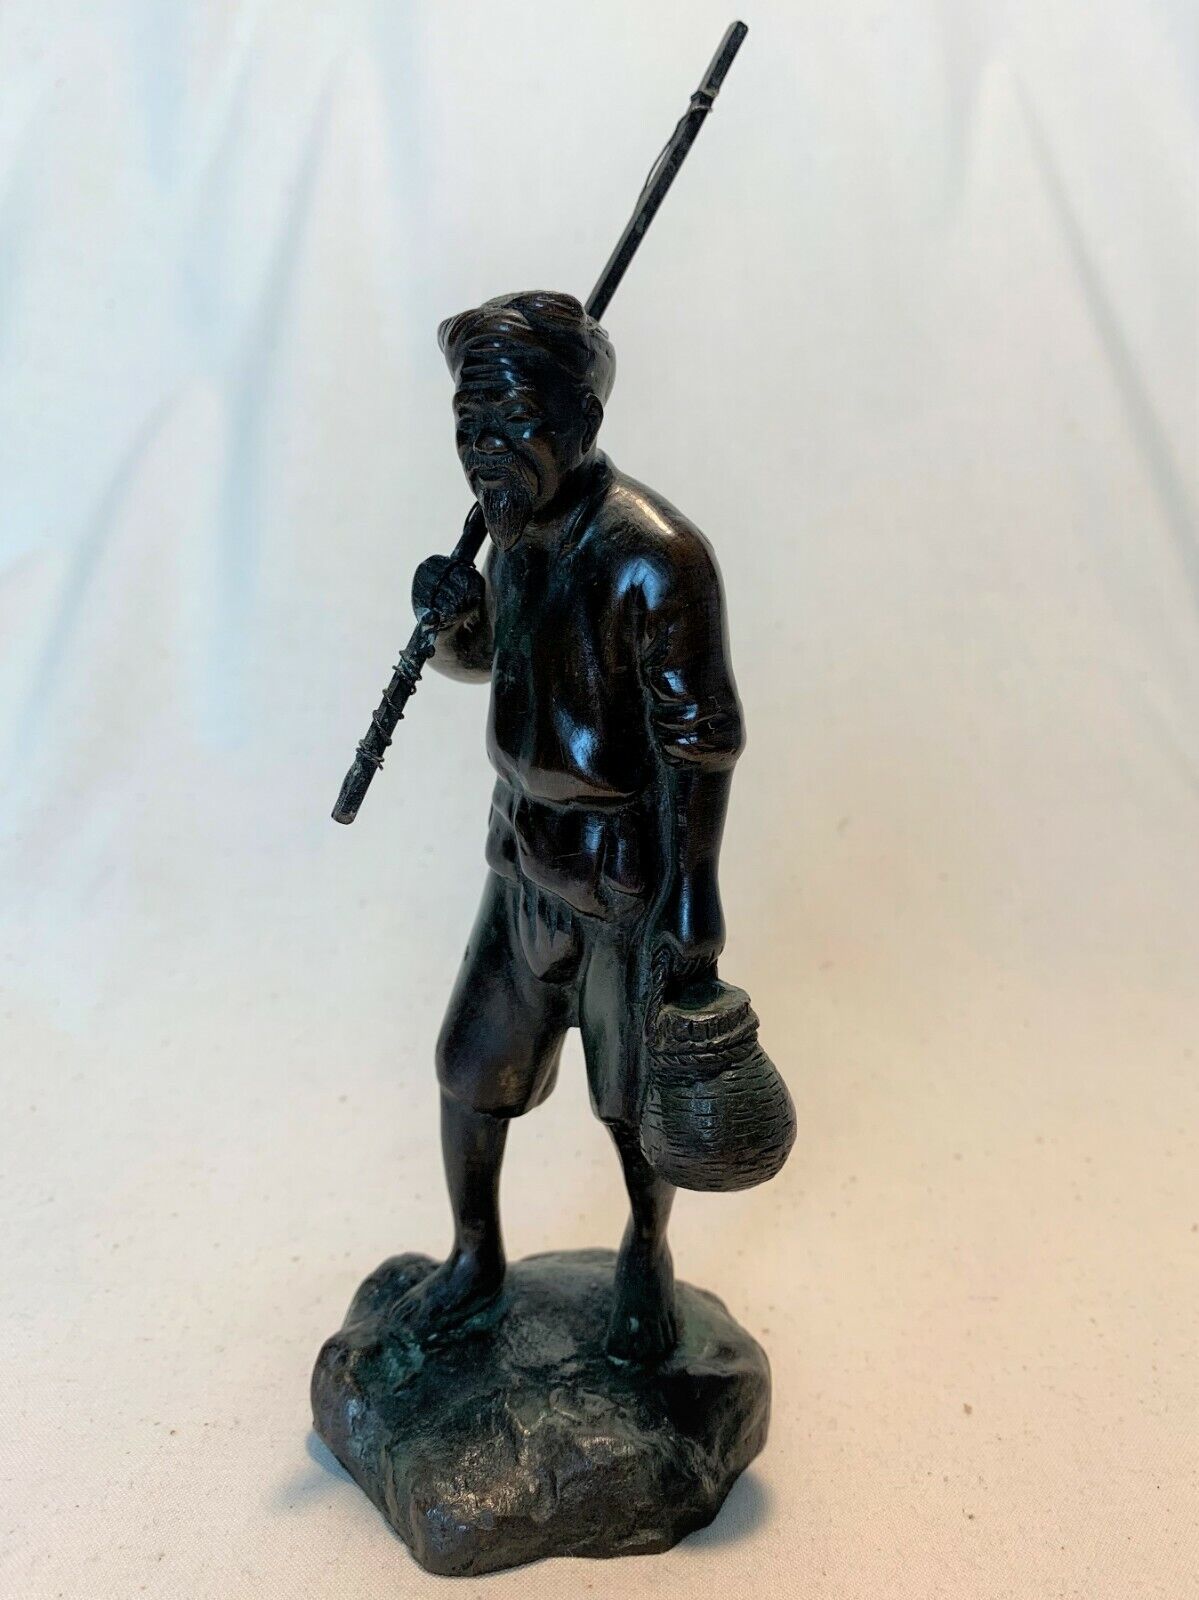 RARE SOUTHEAST ANNAM FRENCH INDOCHINA BRONZE STATUE FISHERMAN EARLY 20TH CENTURY